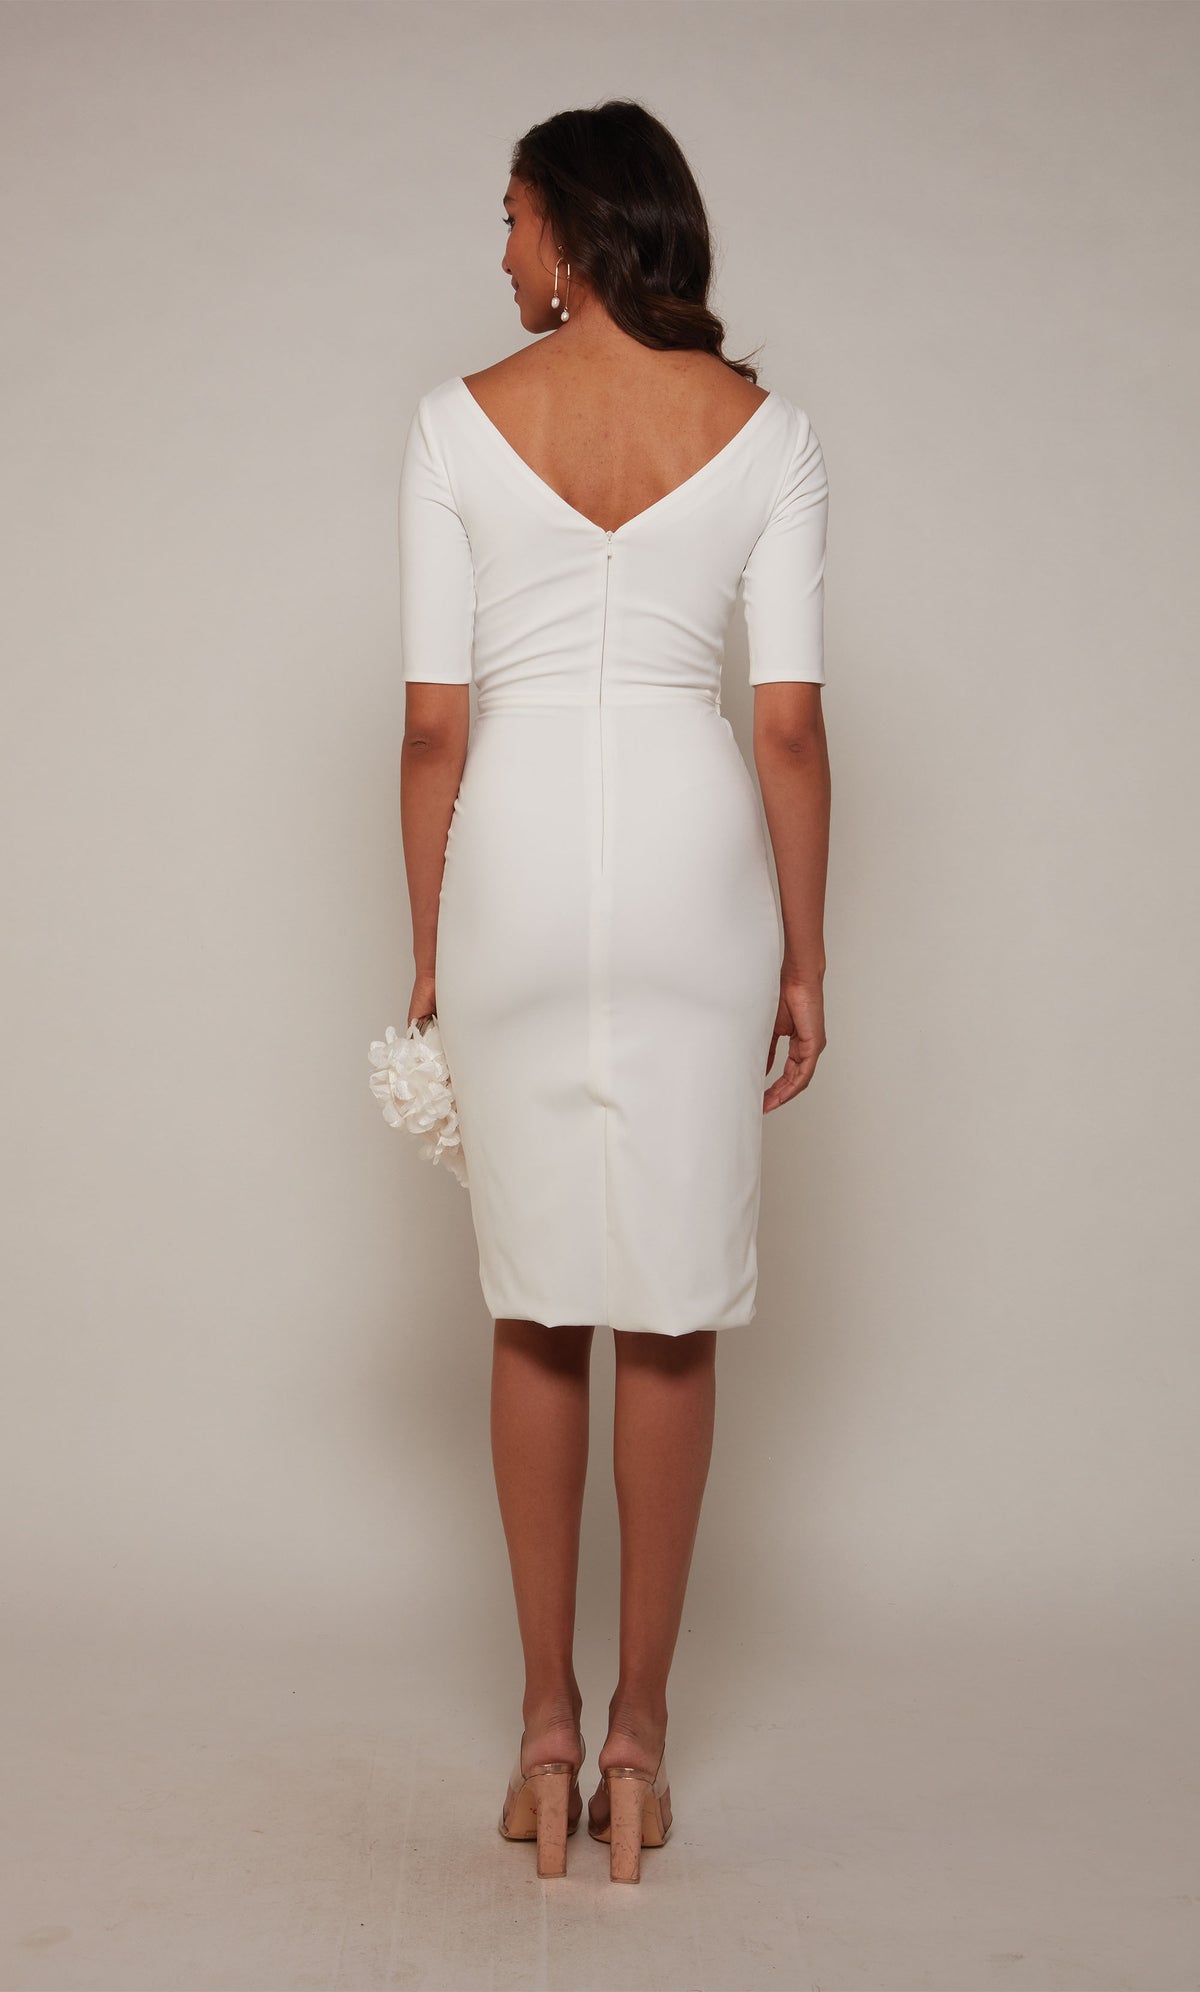 A fitted, knee length cocktail dress with a V-shaped back and 3/4 sleeves in ivory.